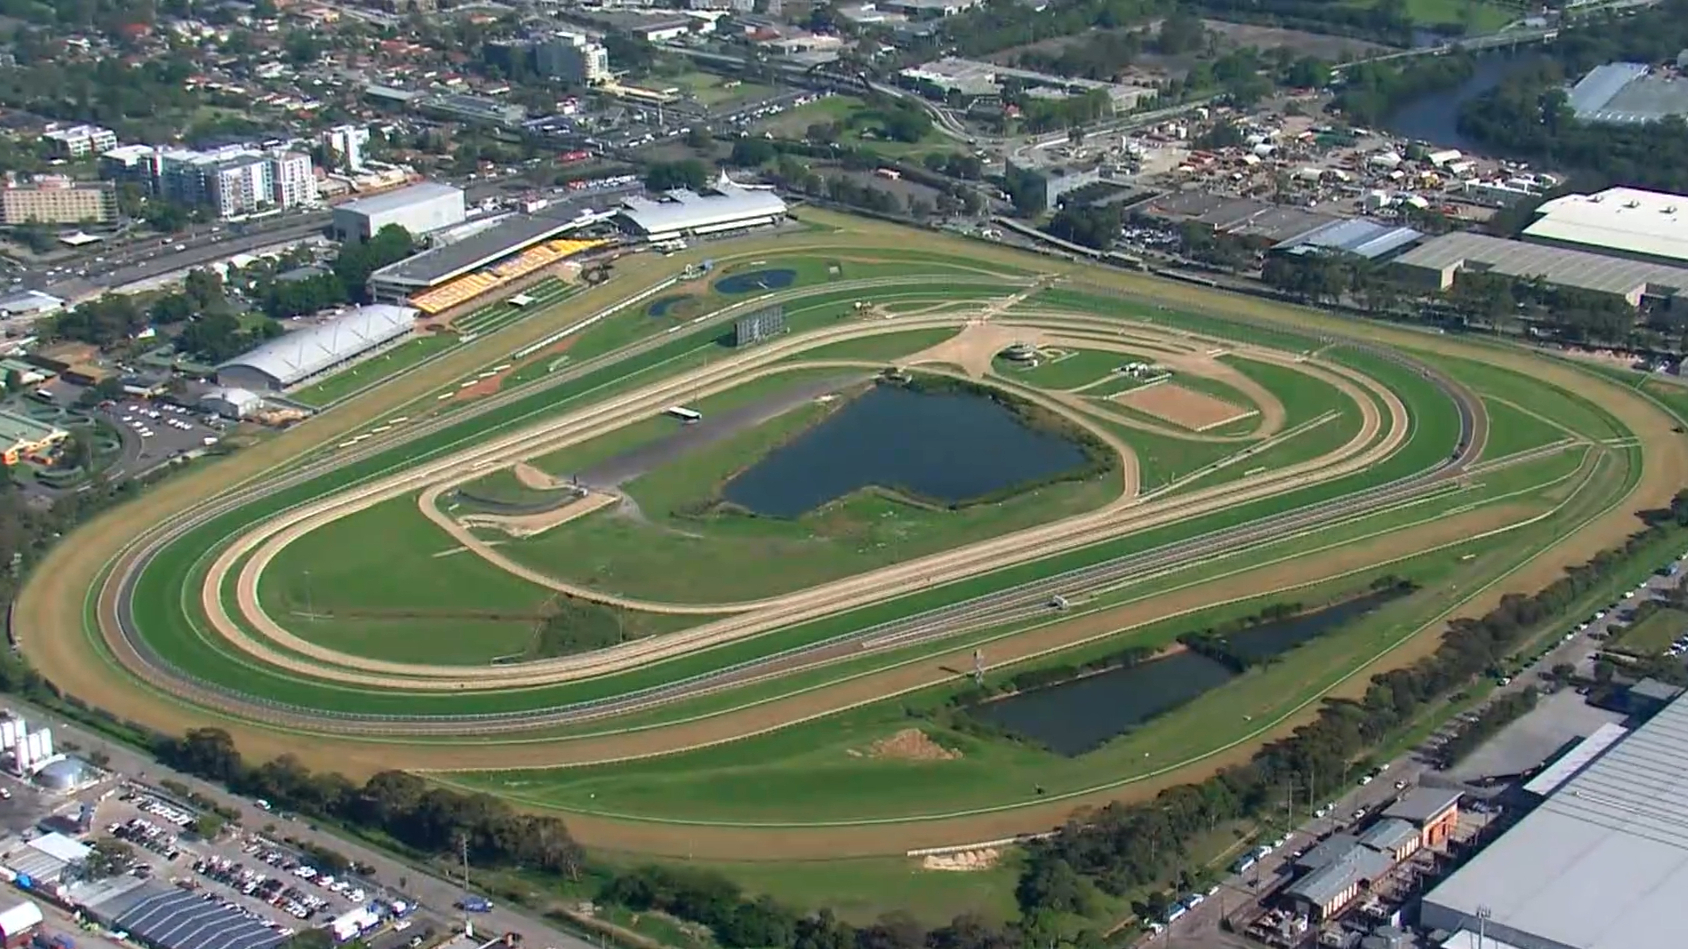 Racing royalty trying to stop crucial Sydney housing plan.